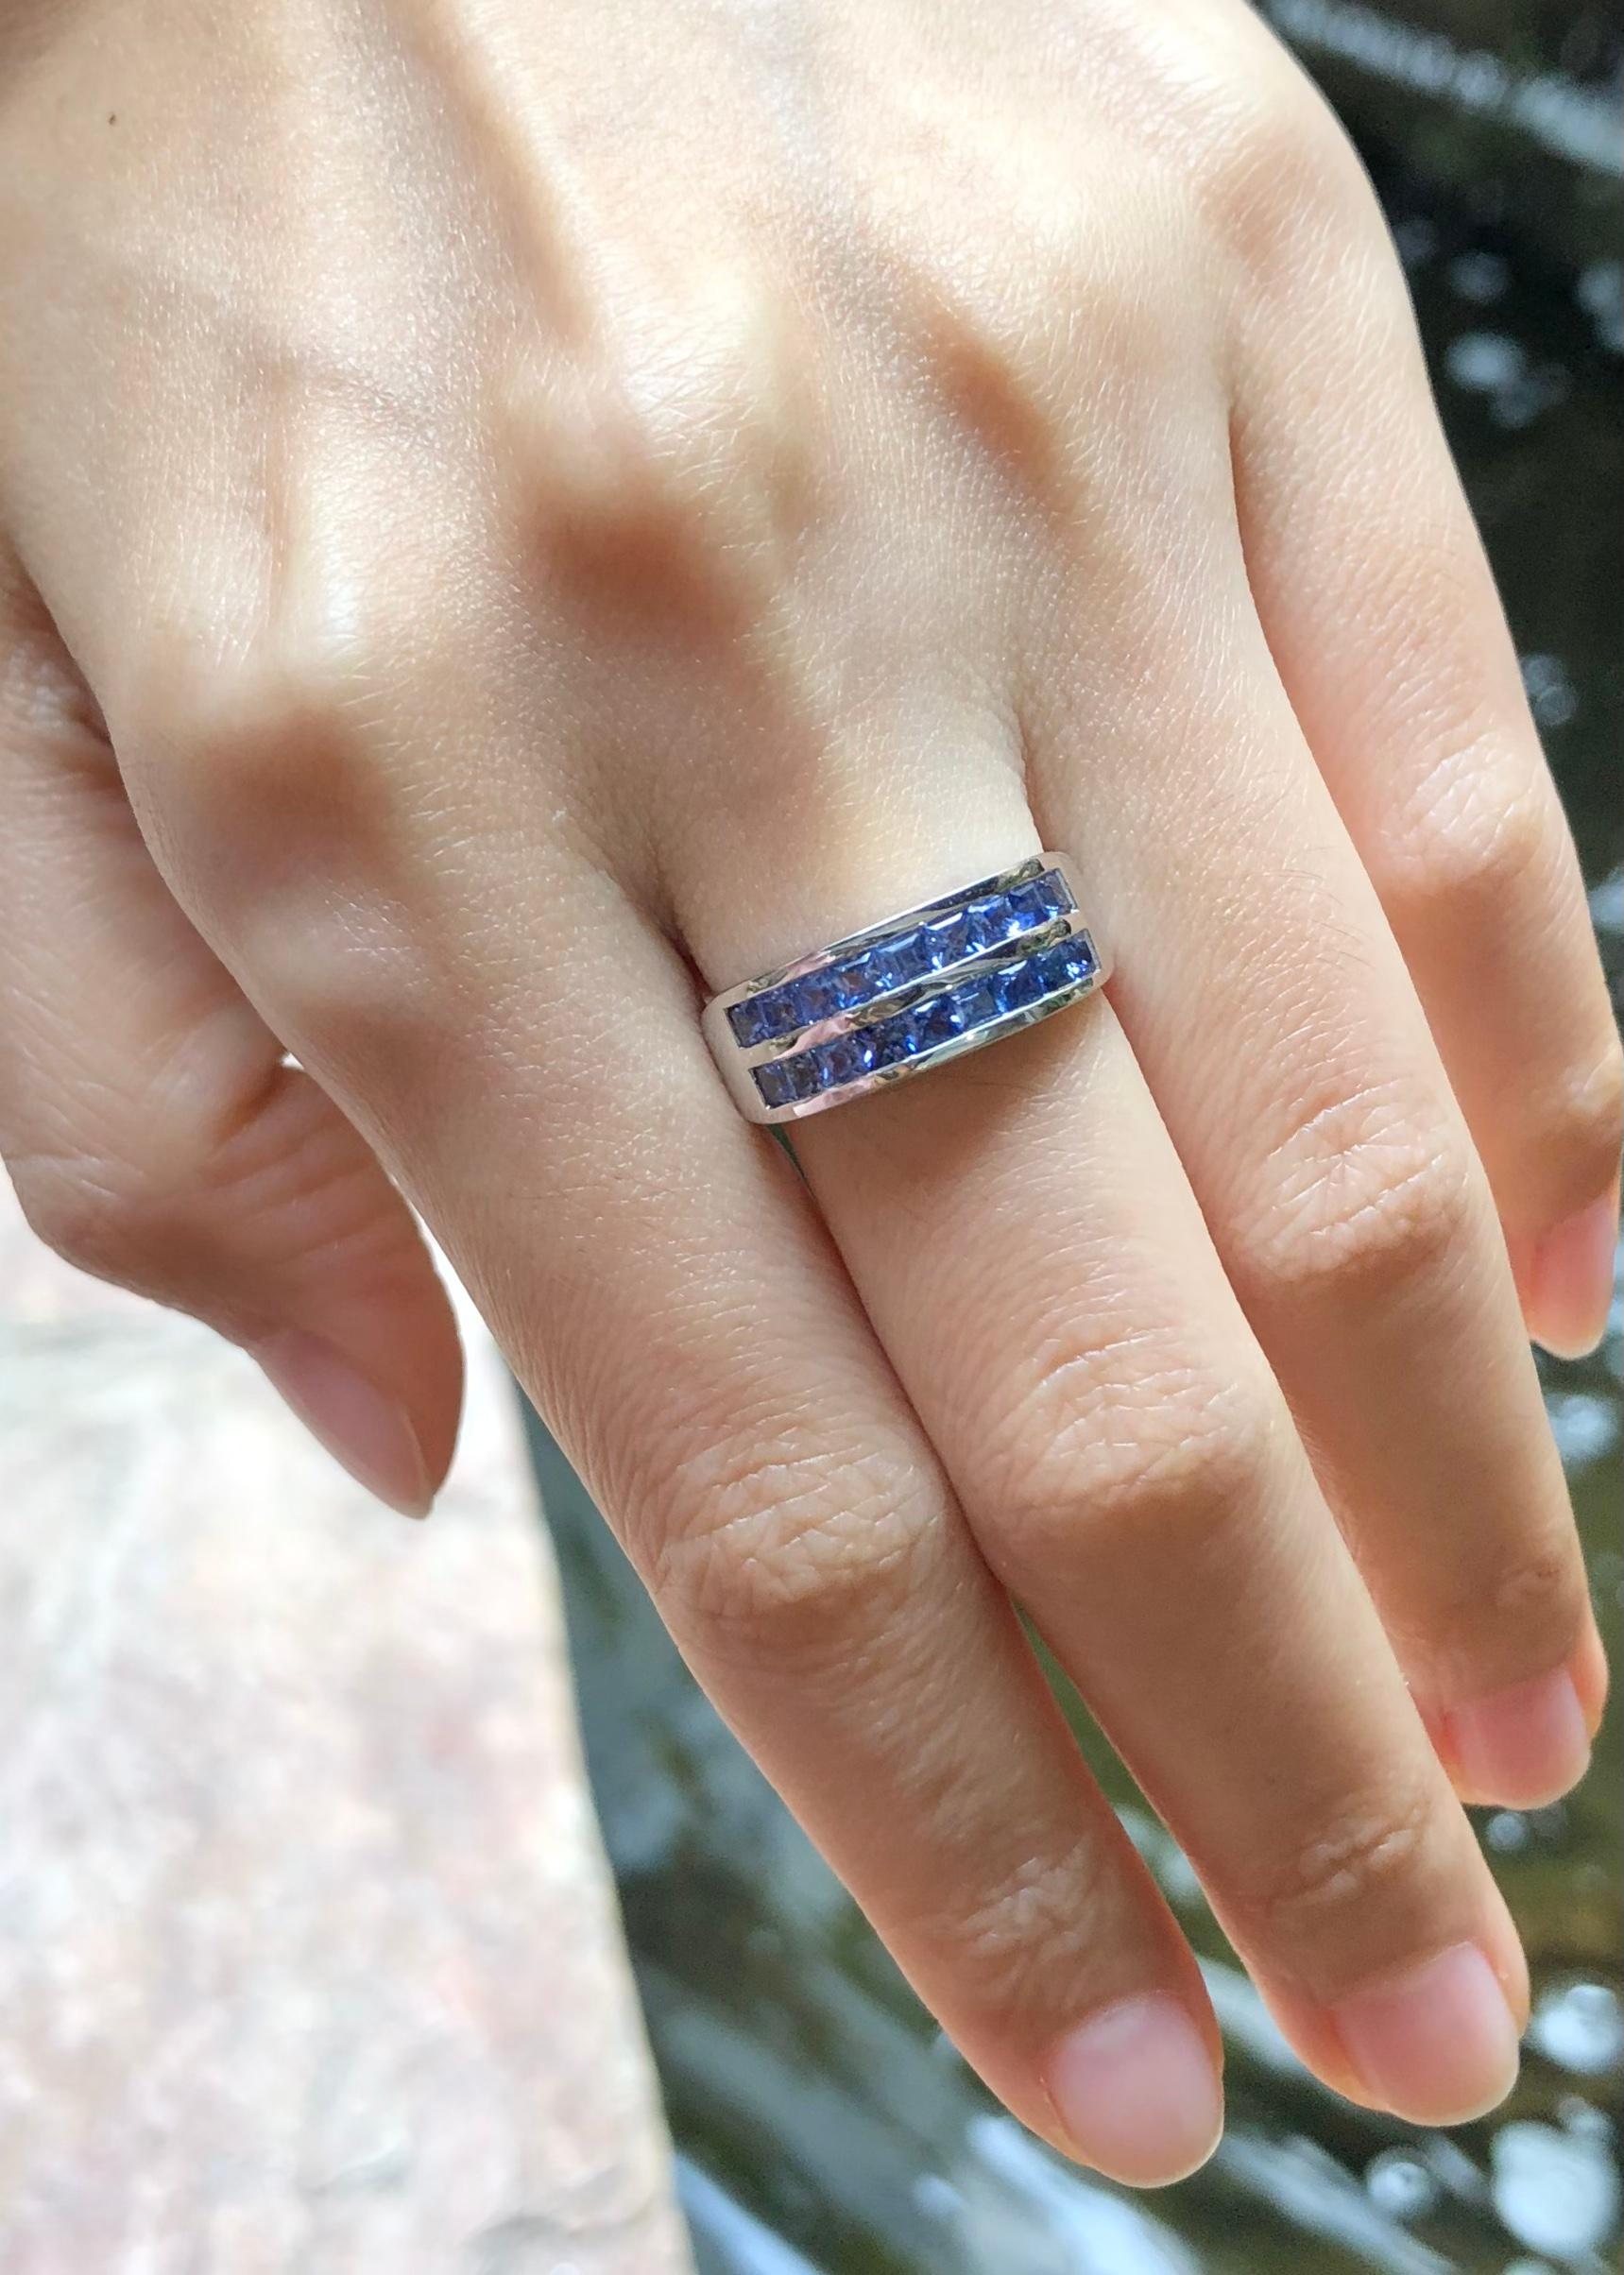 Blue Sapphire  Ring set in Silver Settings

Width:  1.8 cm 
Length: 0.7 cm
Ring Size: 55
Total Weight: 4.59 grams

*Please note that the silver setting is plated with rhodium to promote shine and help prevent oxidation.  However, with the nature of